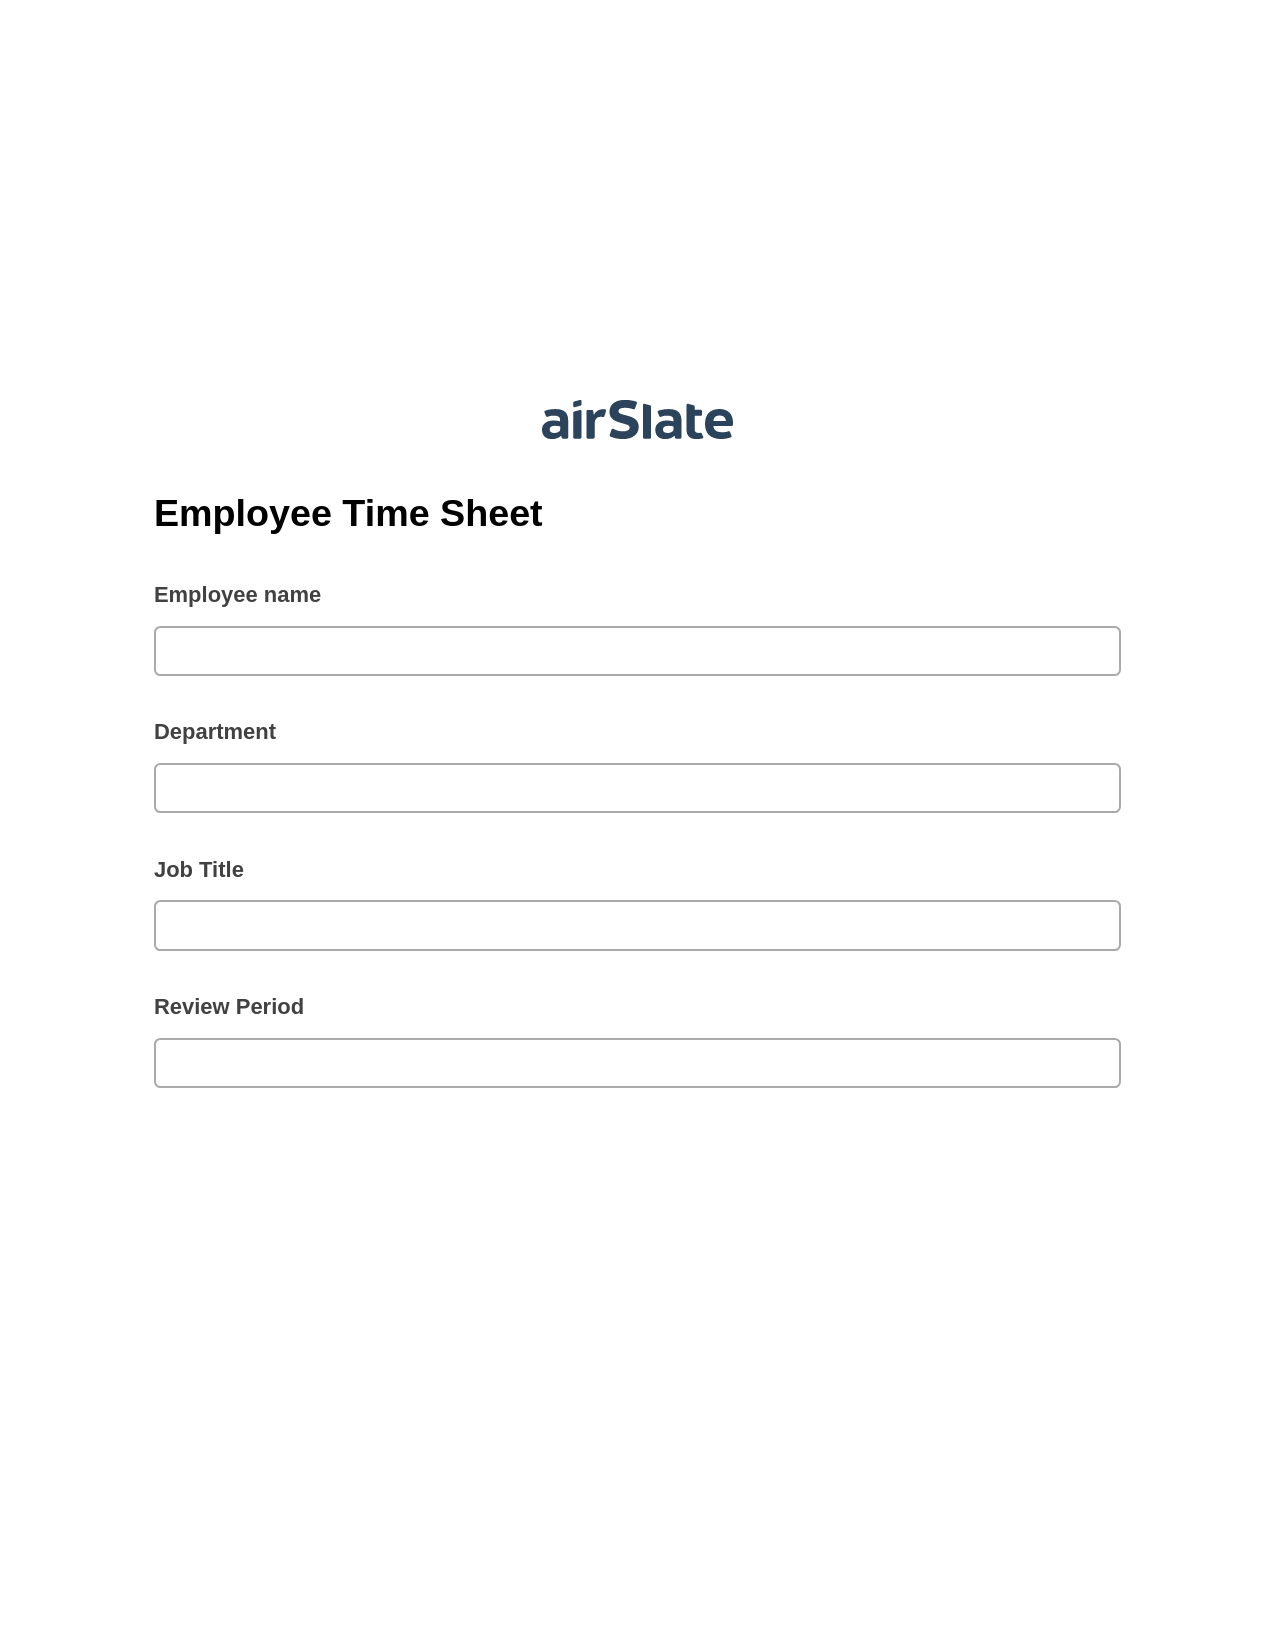 Employee Time Sheet Pre-fill from MS Dynamics 365 Records, Update Audit Trail Bot, Archive to SharePoint Folder Bot